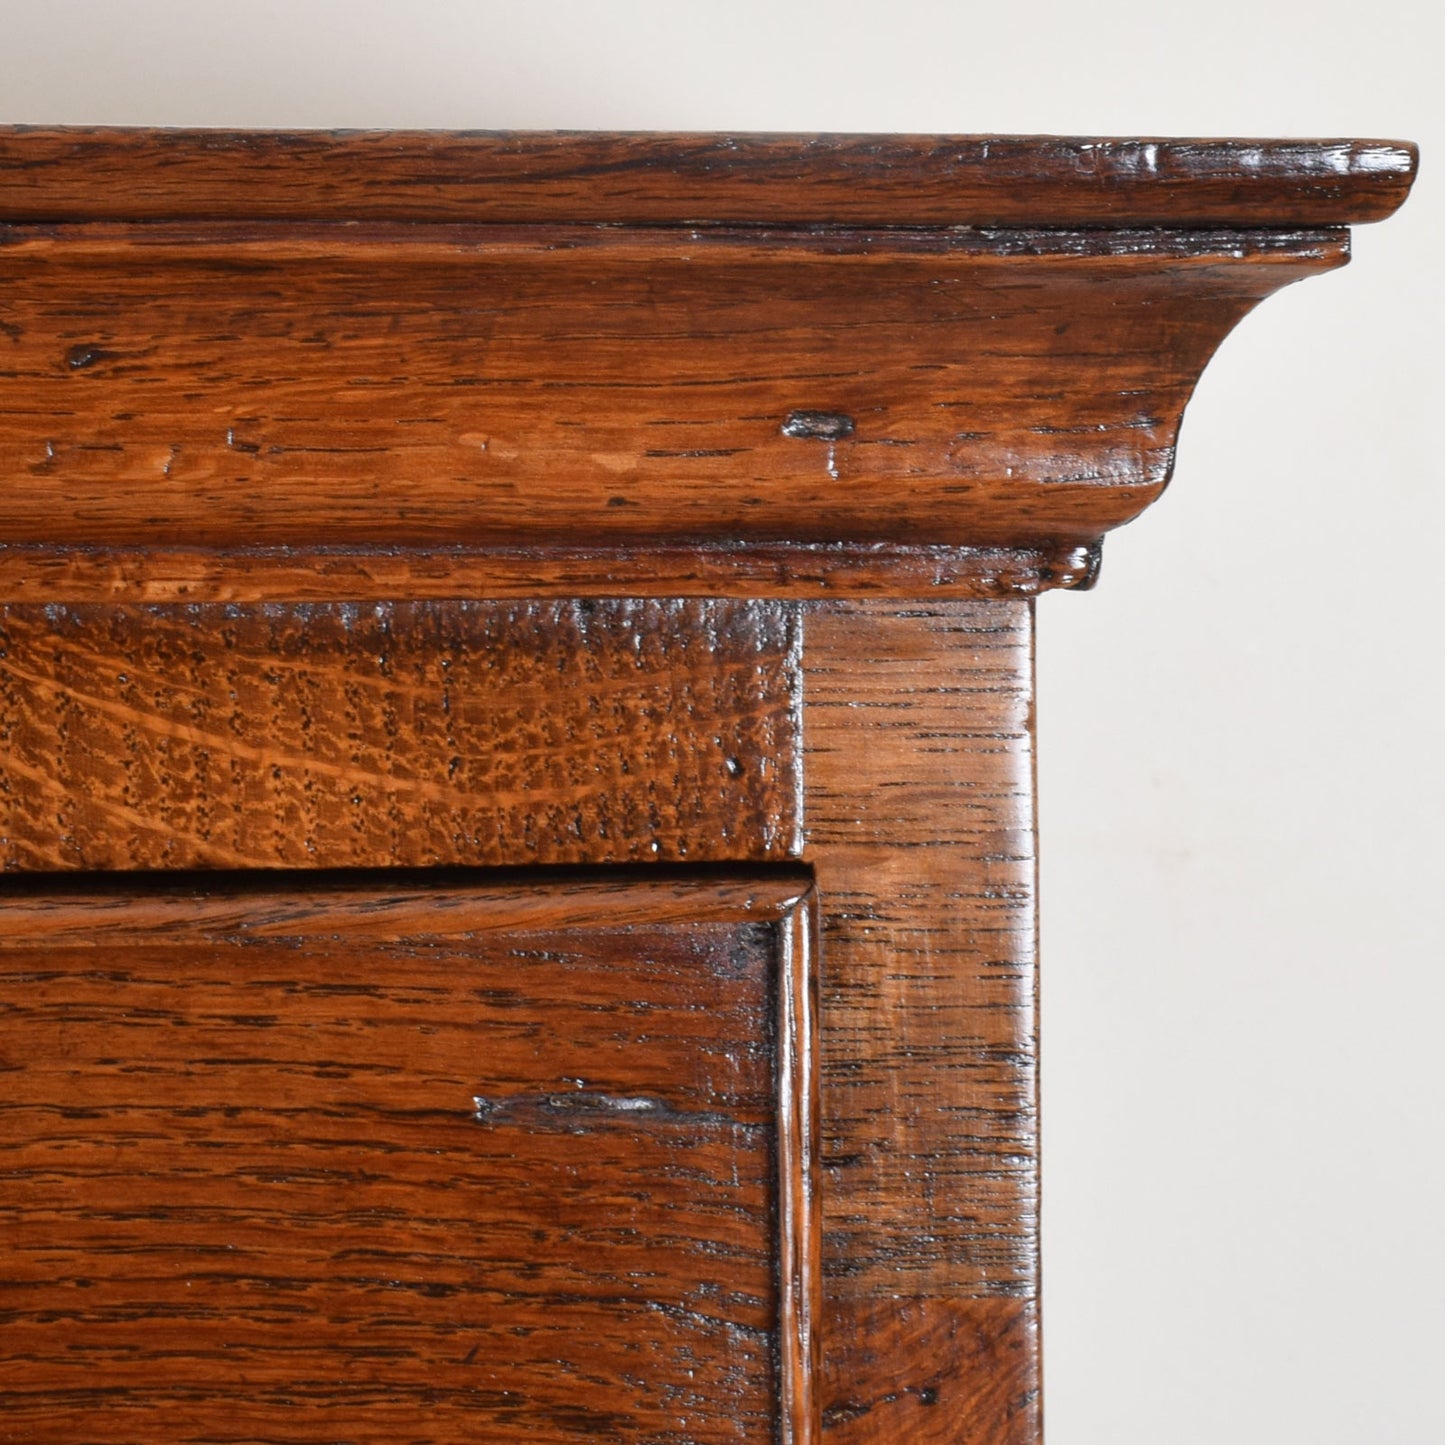 Victorian Chest on Chest Drawers